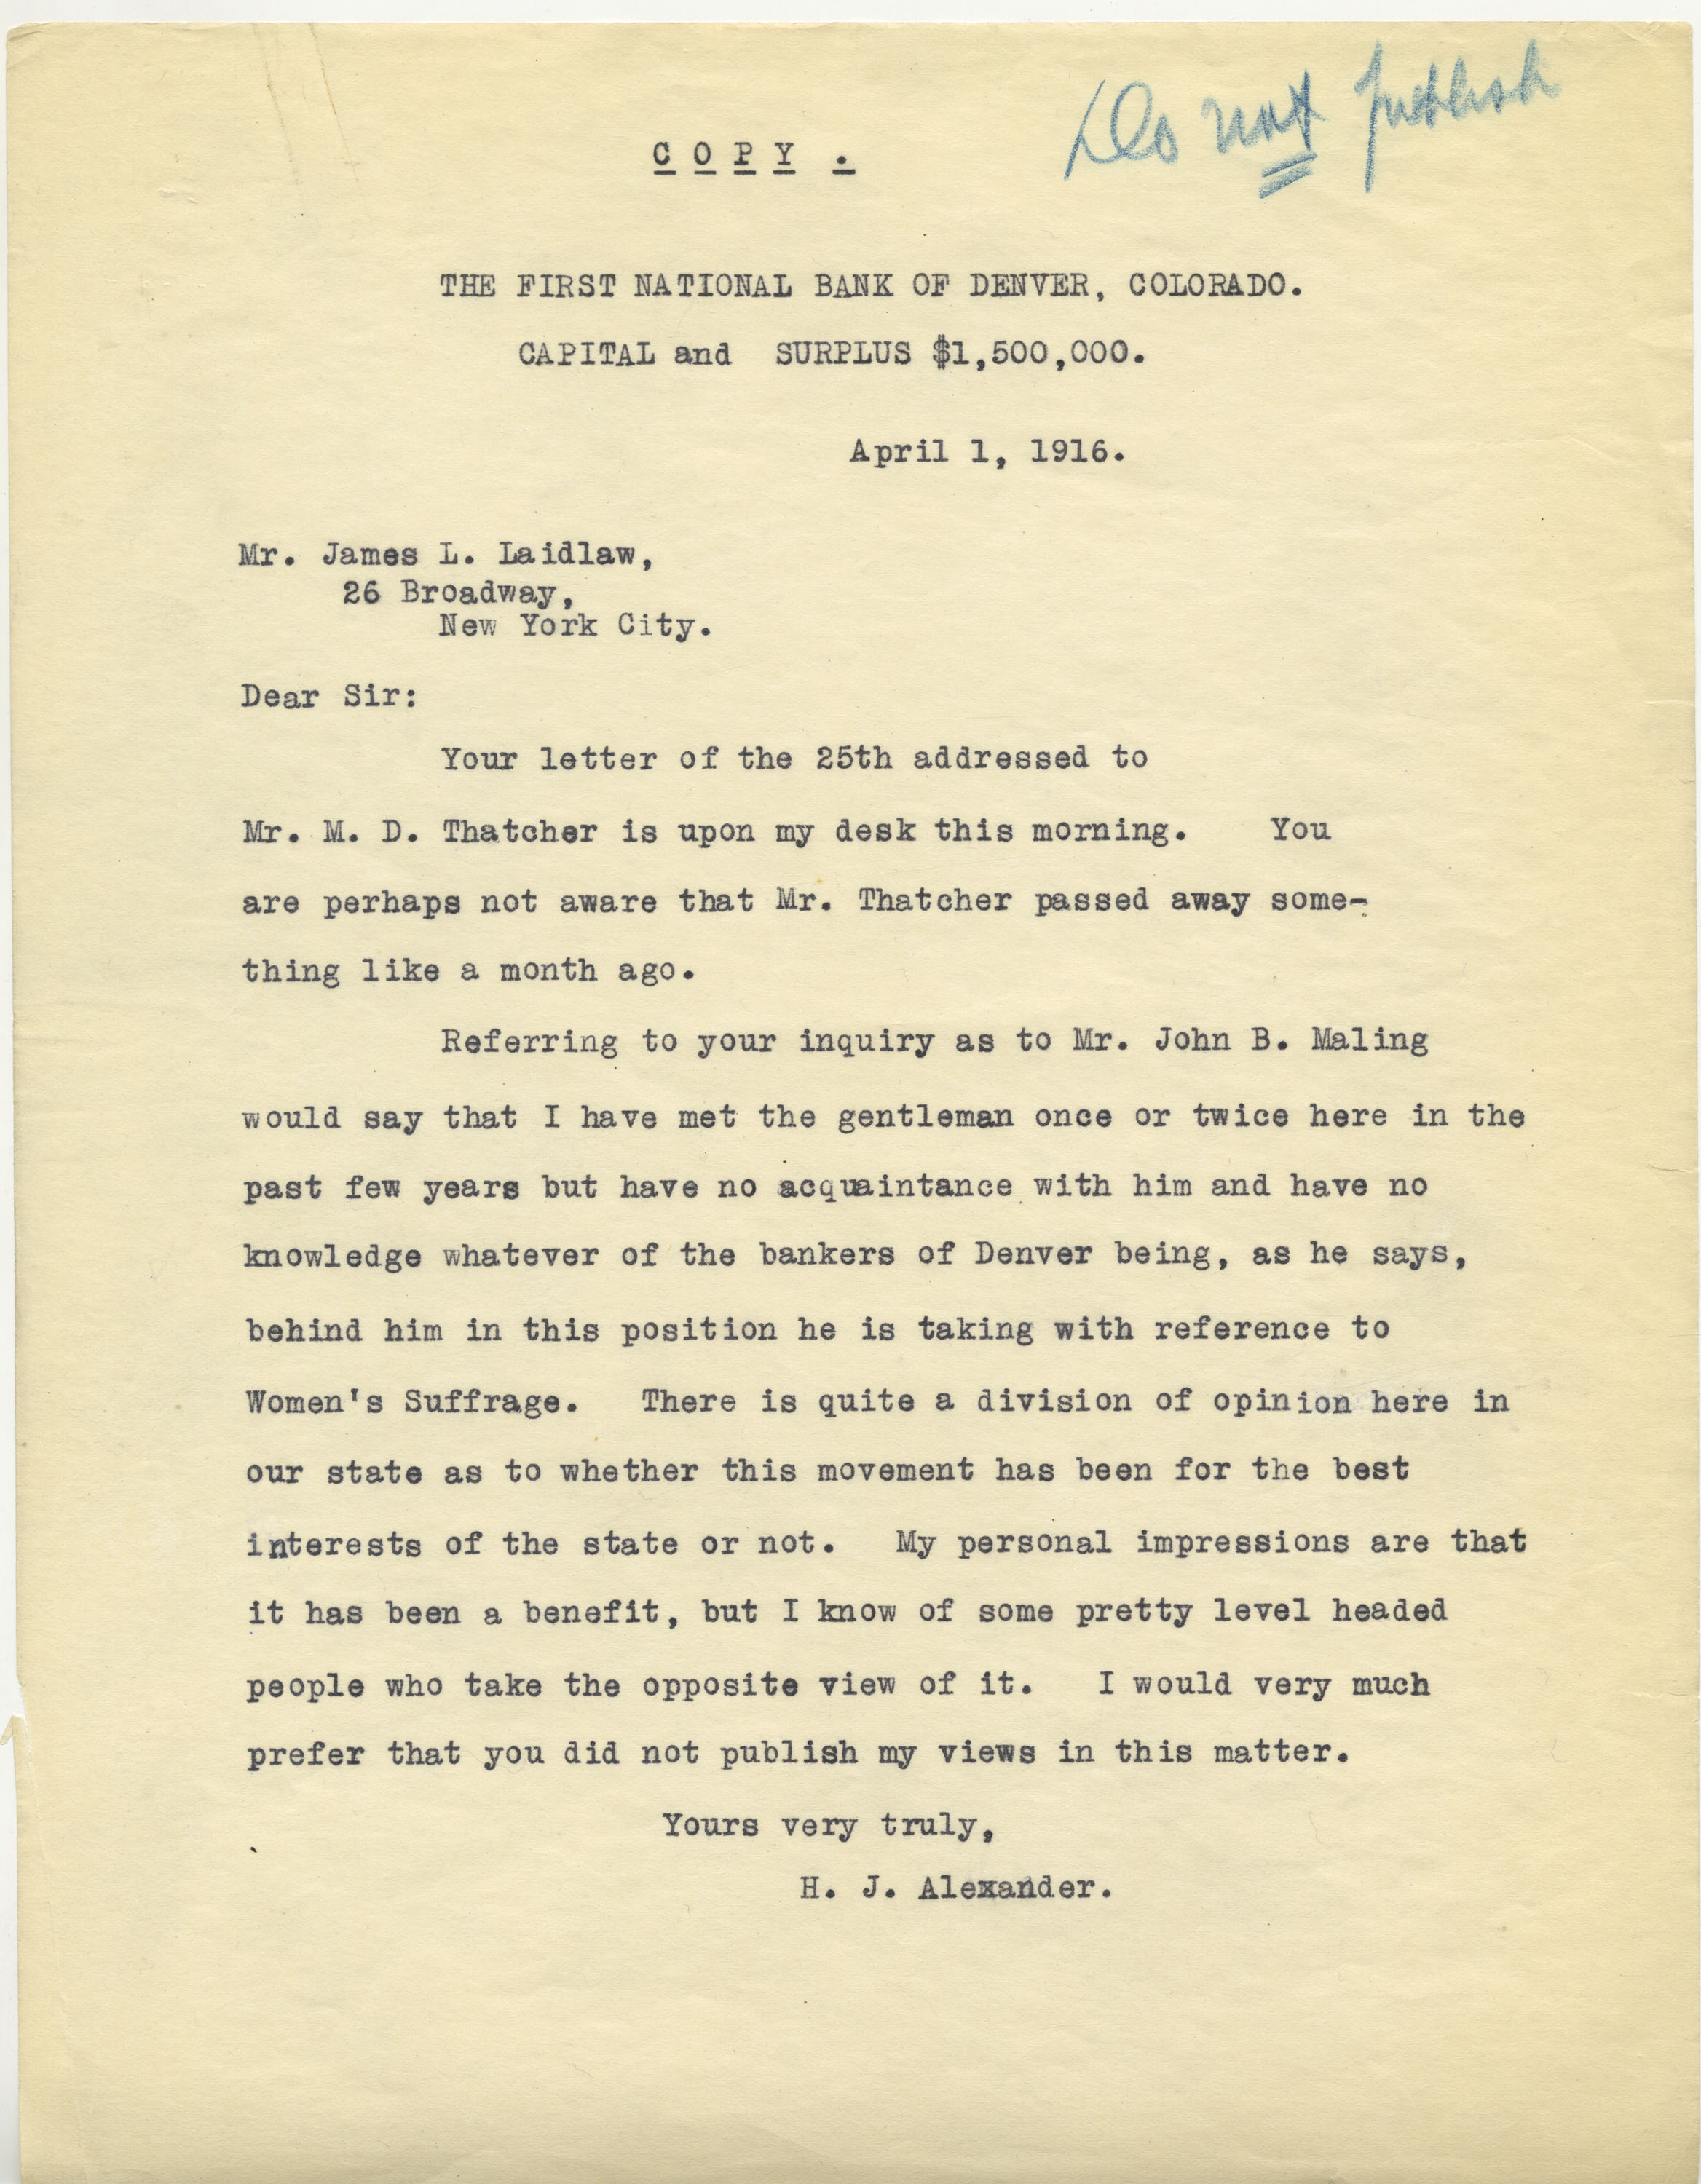 Letters on suffrage from Colorado bankers, 1916.